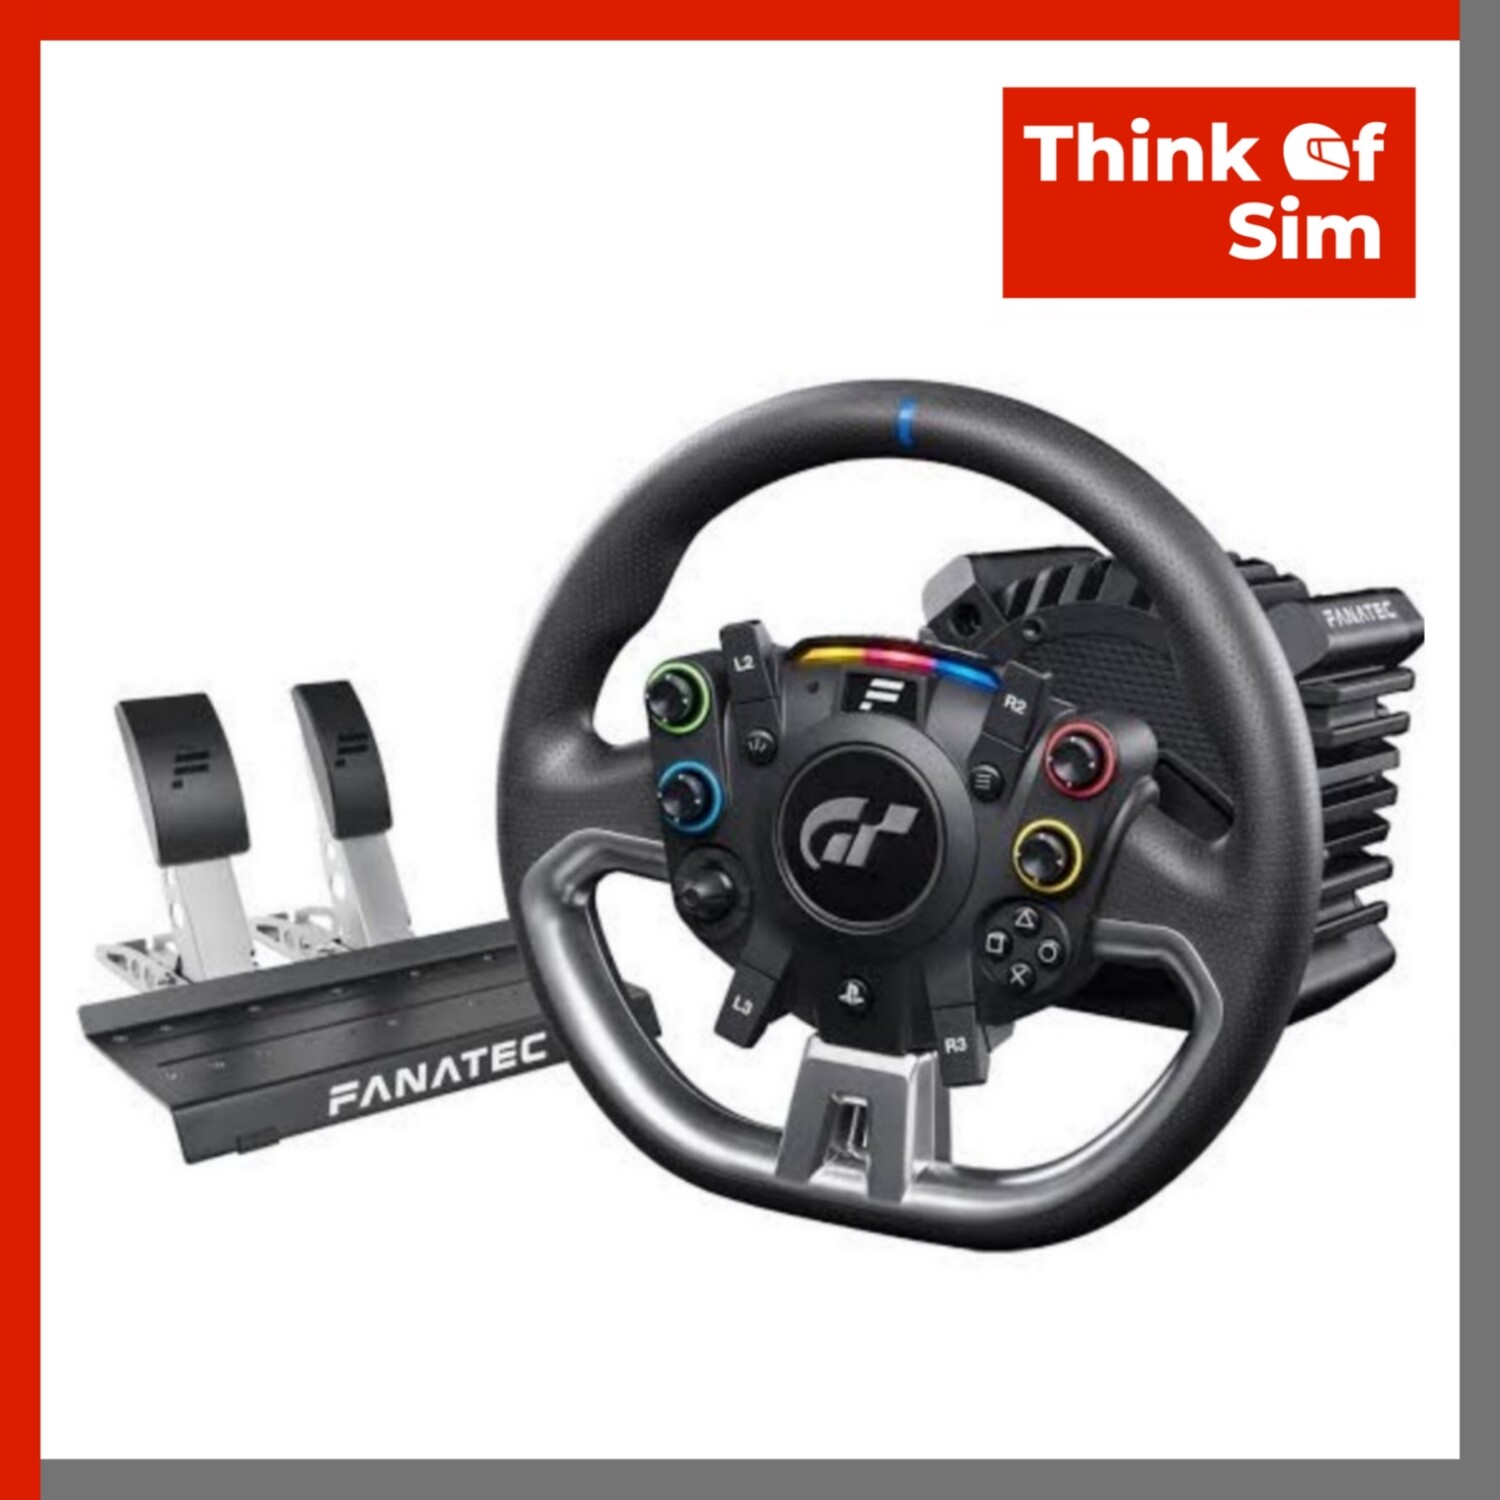 Fanatec Gran Turismo DD Pro (8Nm - Excludes Loadcell)